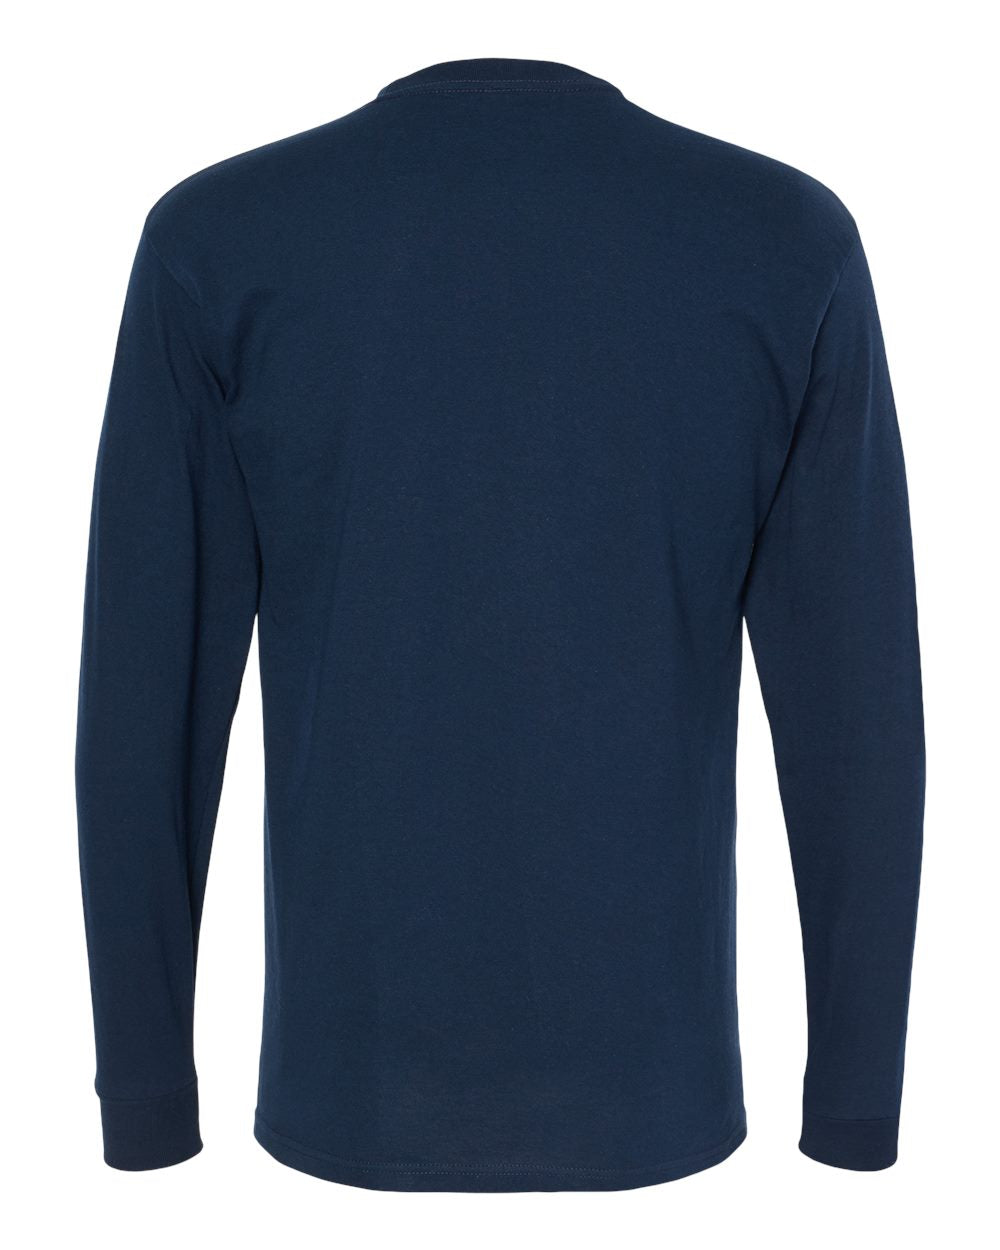 M&O Gold Soft Touch Long Sleeve T-Shirt 4820 #color_Deep Navy